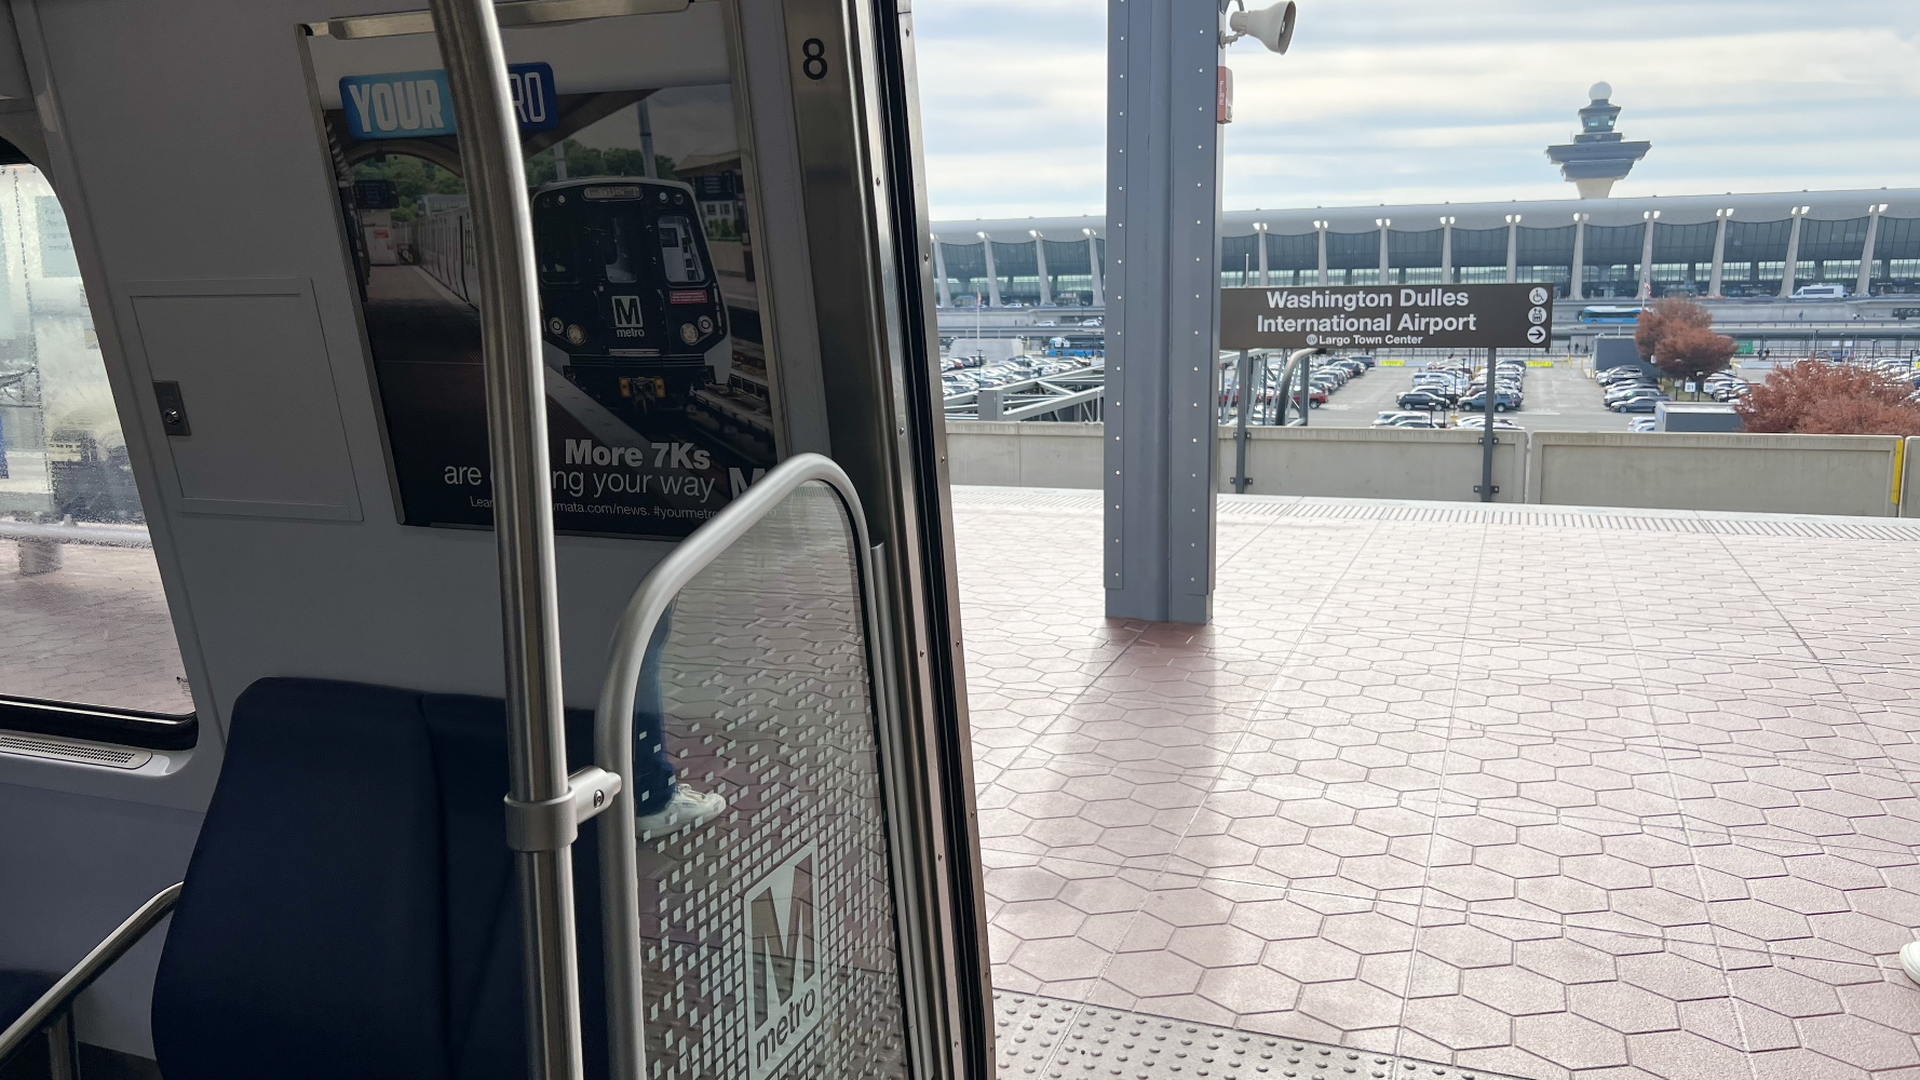 A view of Dulles Airport from inside a Metro train.